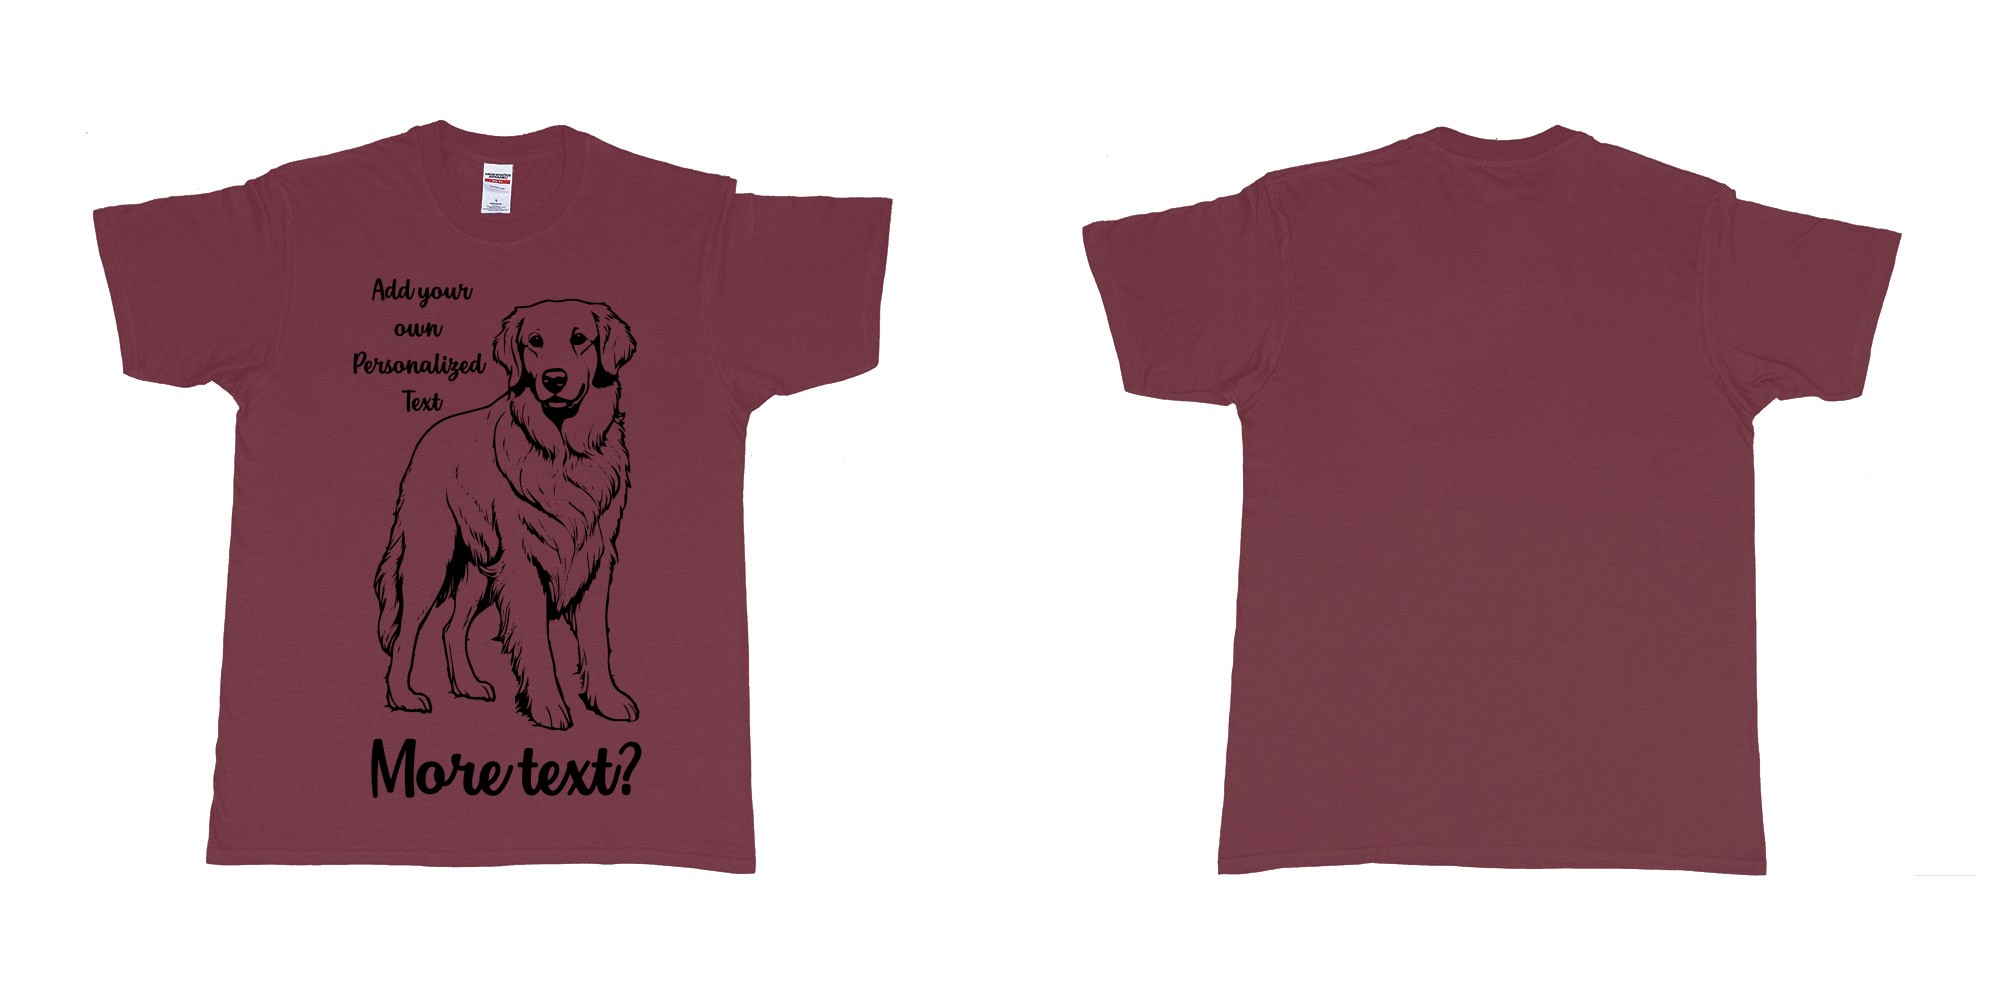 Custom tshirt design golden retriever dog breed personalized text in fabric color marron choice your own text made in Bali by The Pirate Way